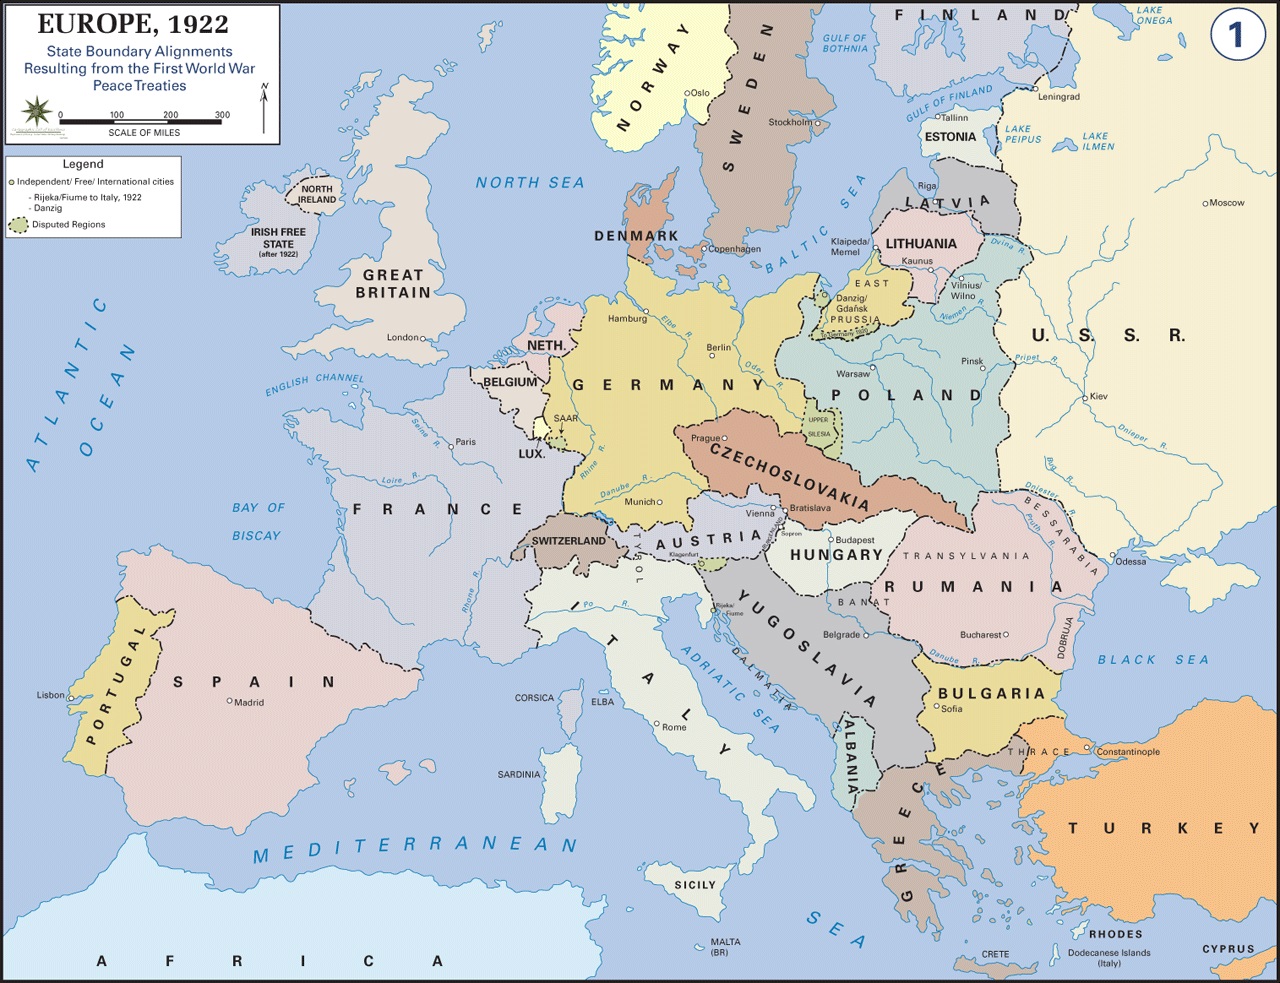 world war map of europe after ww1 Europe After World War I world war map of europe after ww1